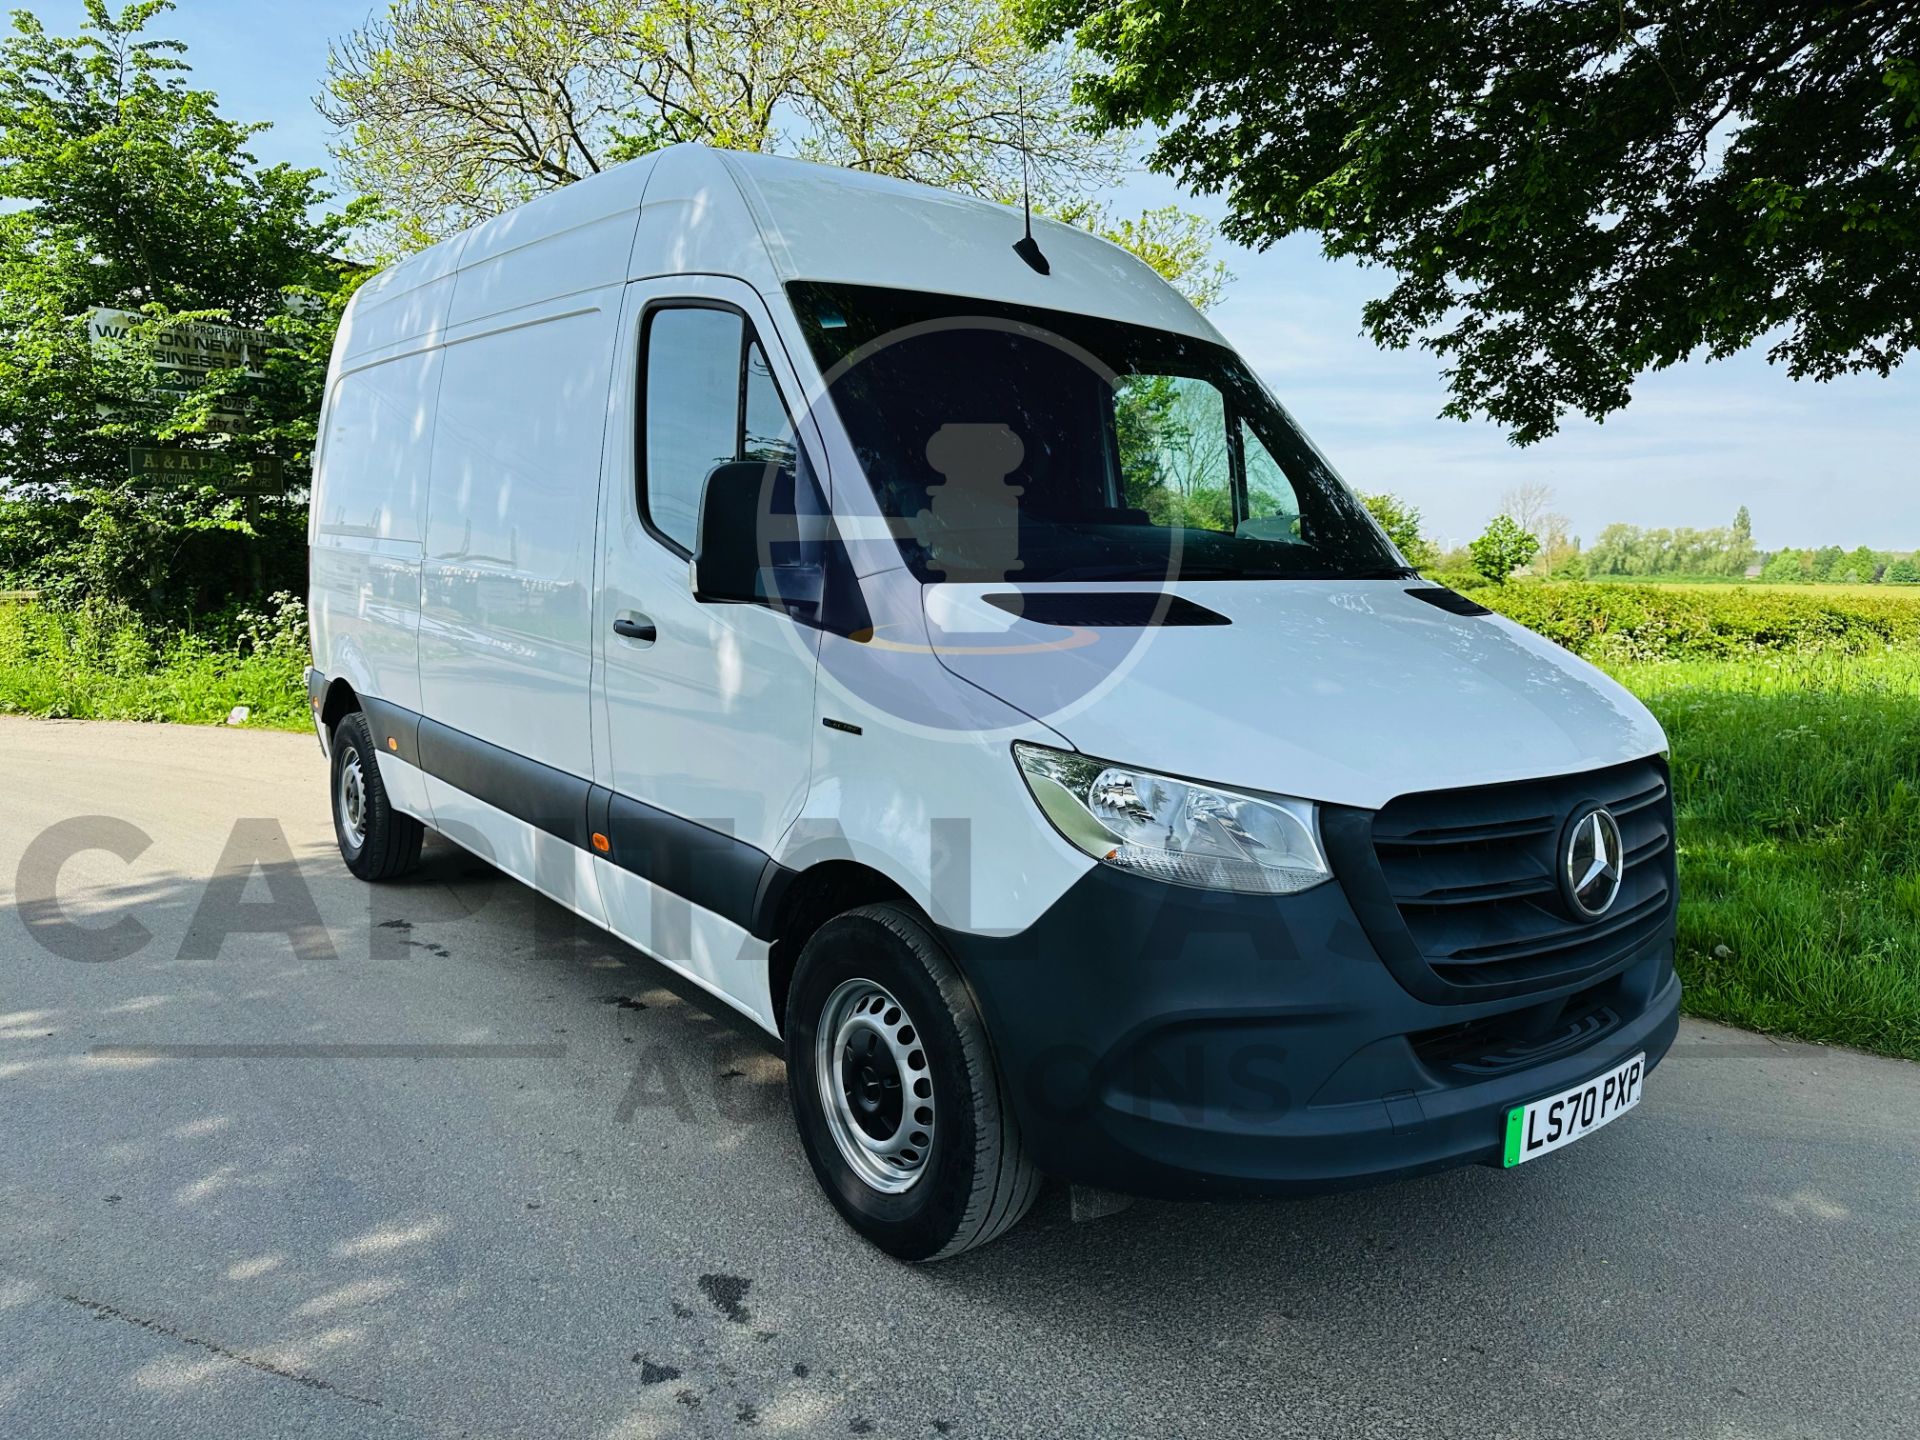 MERCEDES-BENZ SPRINTER *MEDIUM WHEEL BASE* AUTOMATIC - 2021 MODEL - AIR CONDITIONING - ONLY 5K MILES - Image 2 of 27